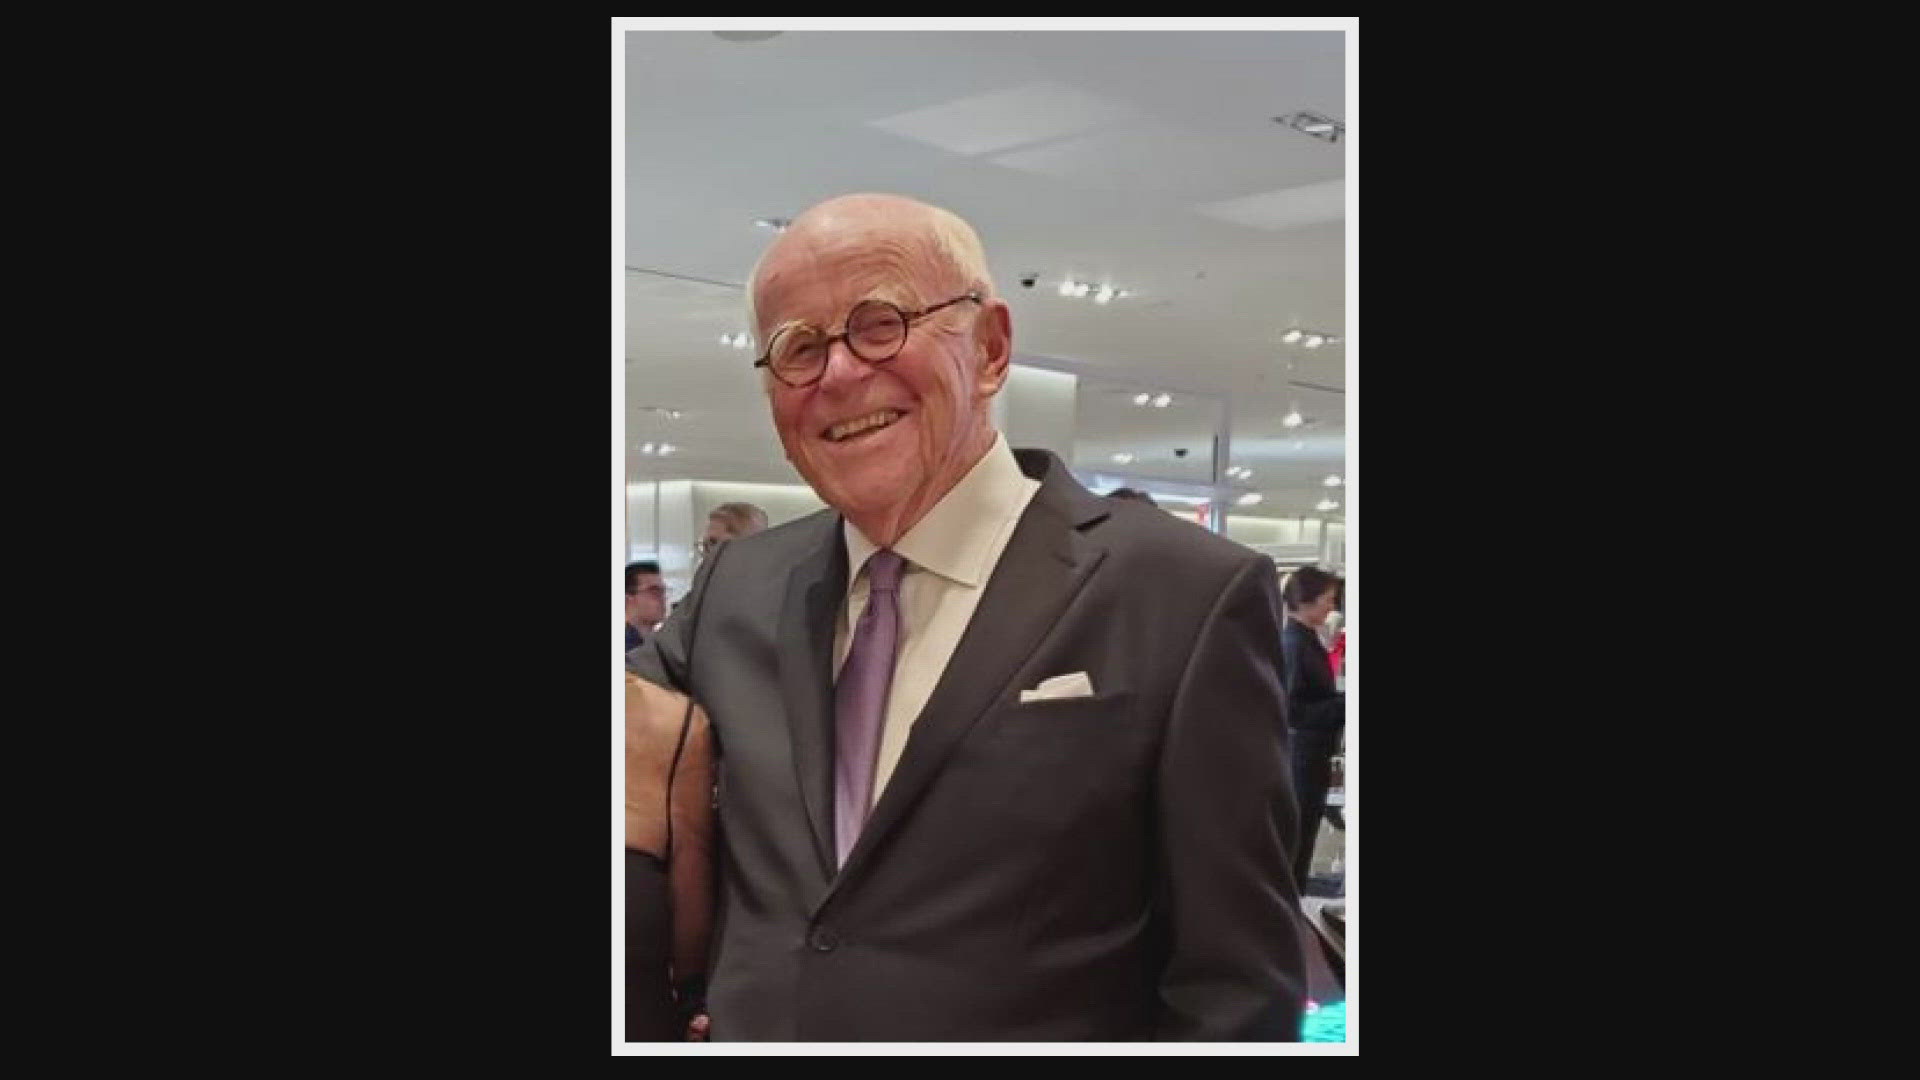 The retail executive died "comfortably at his home" on Saturday, his loved ones said, with his wife by his side.